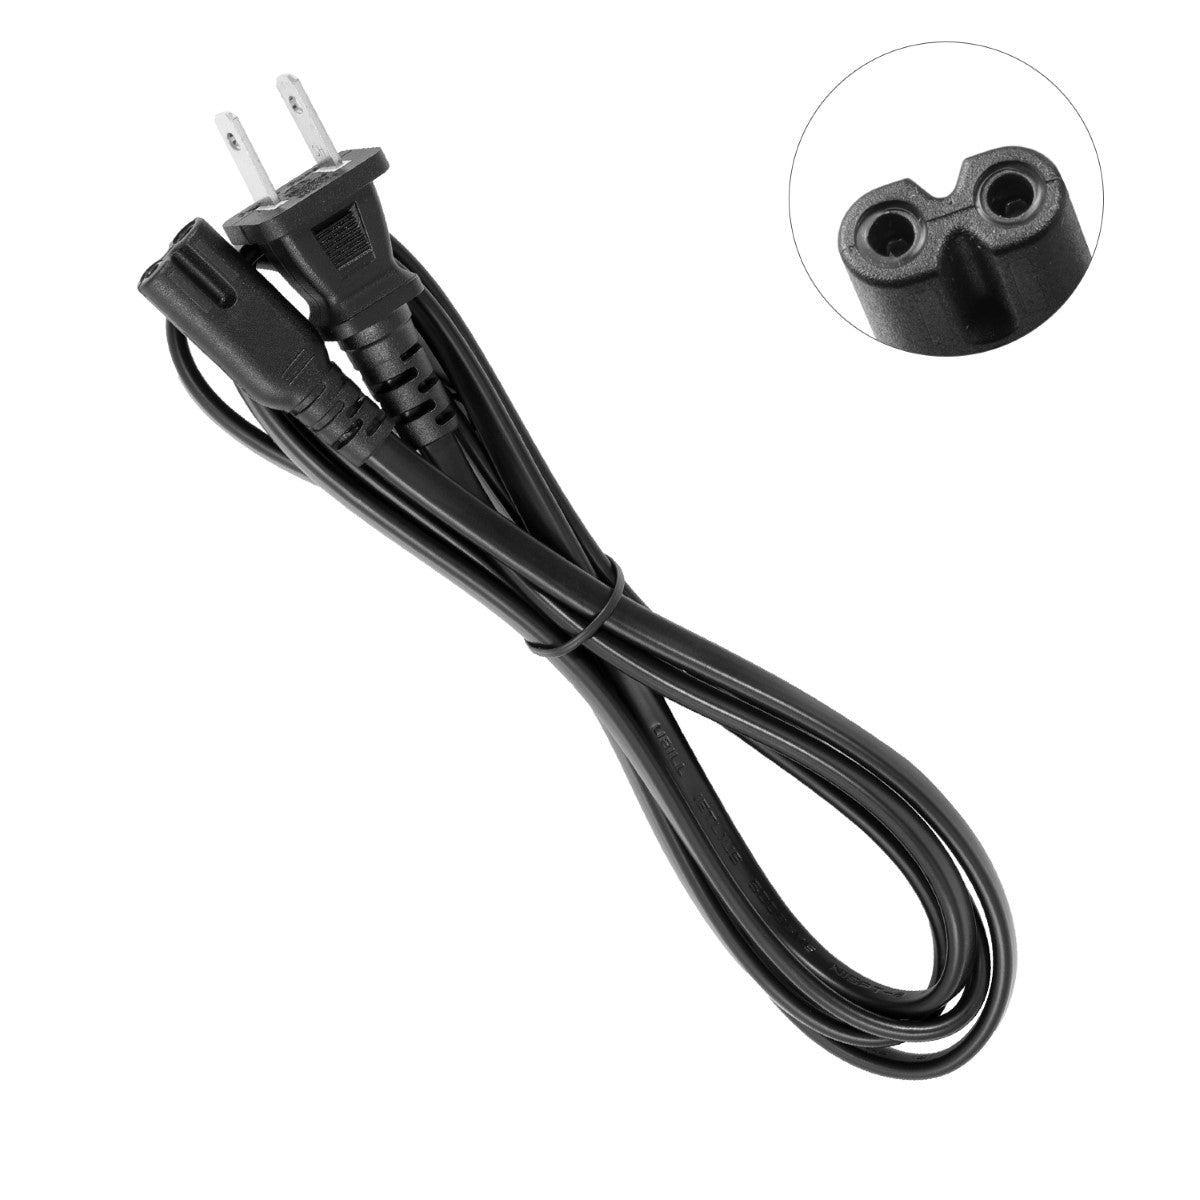 Power Cord for HP ENVY 5540 e-All-in-One Printer.